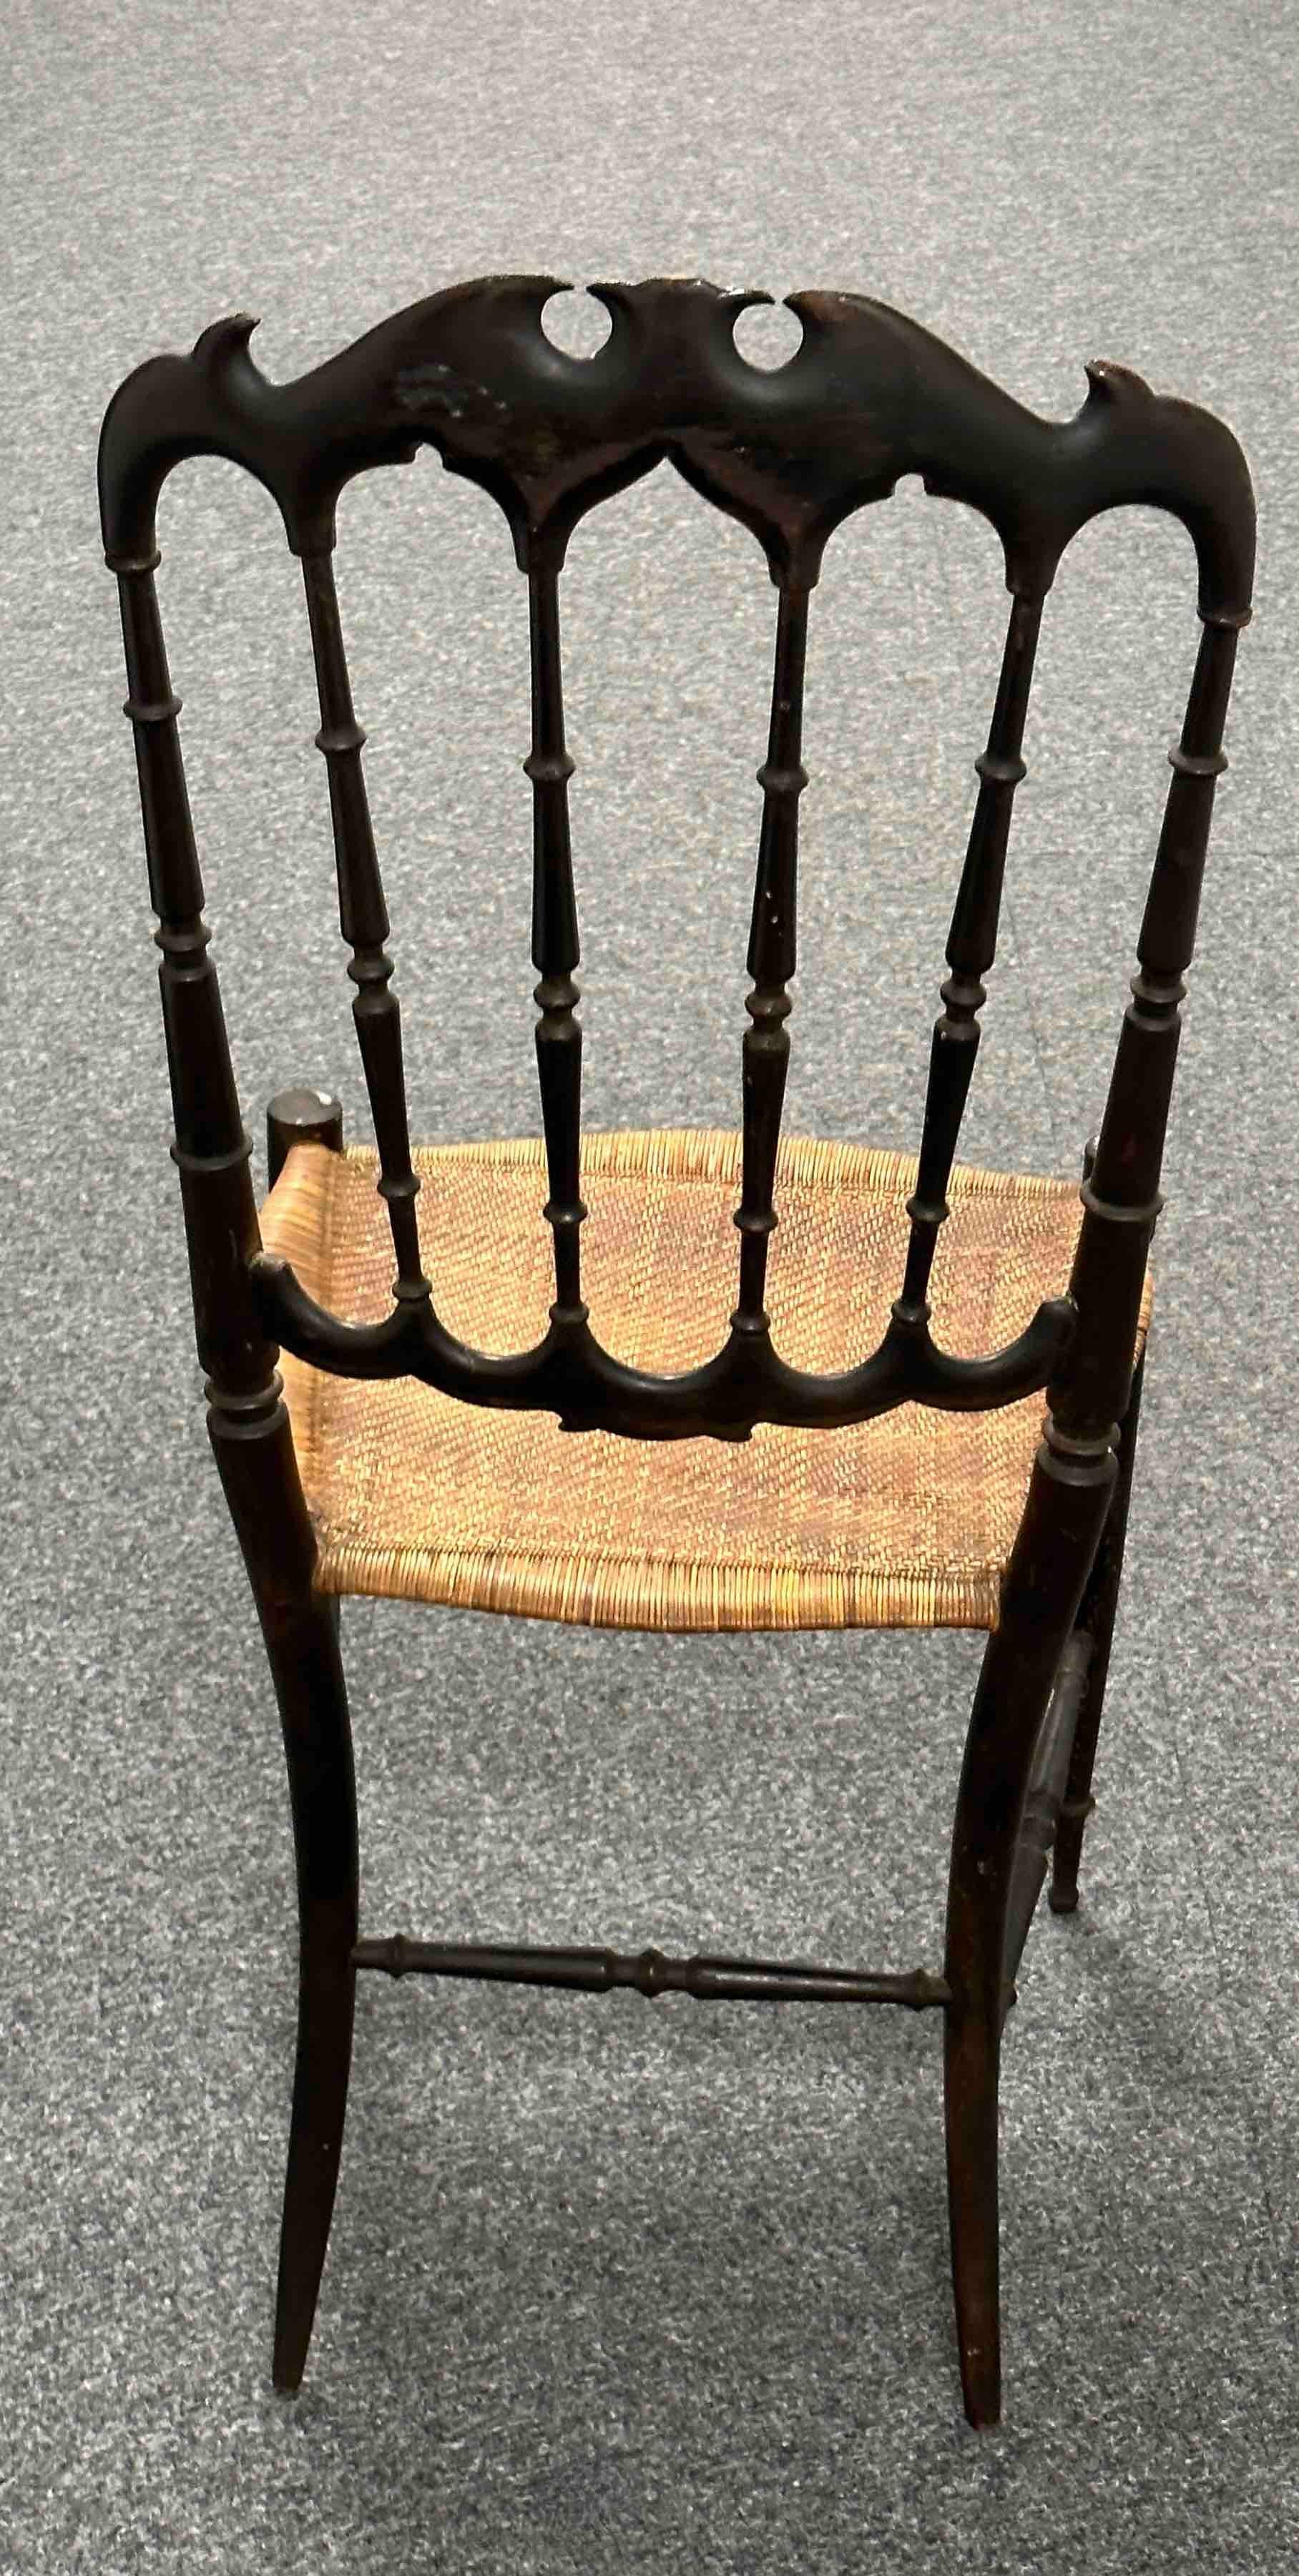 Beautiful Chiavari Wooden Chair Wicker Seat, Made in Liguria, Italy, 1930s For Sale 12